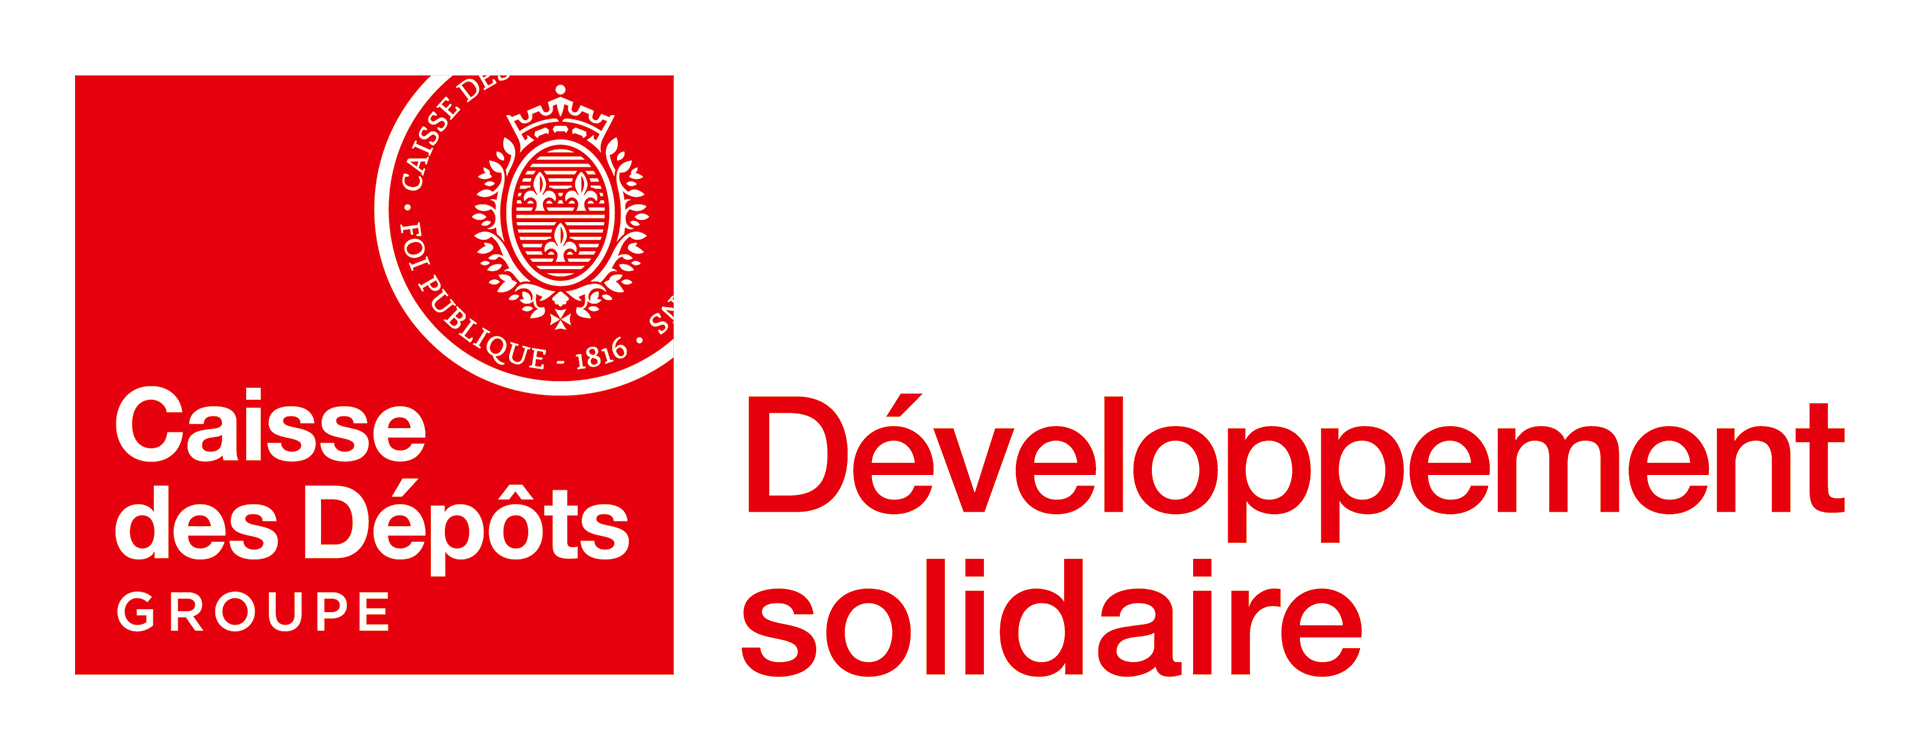 Logo Developpement solidaire